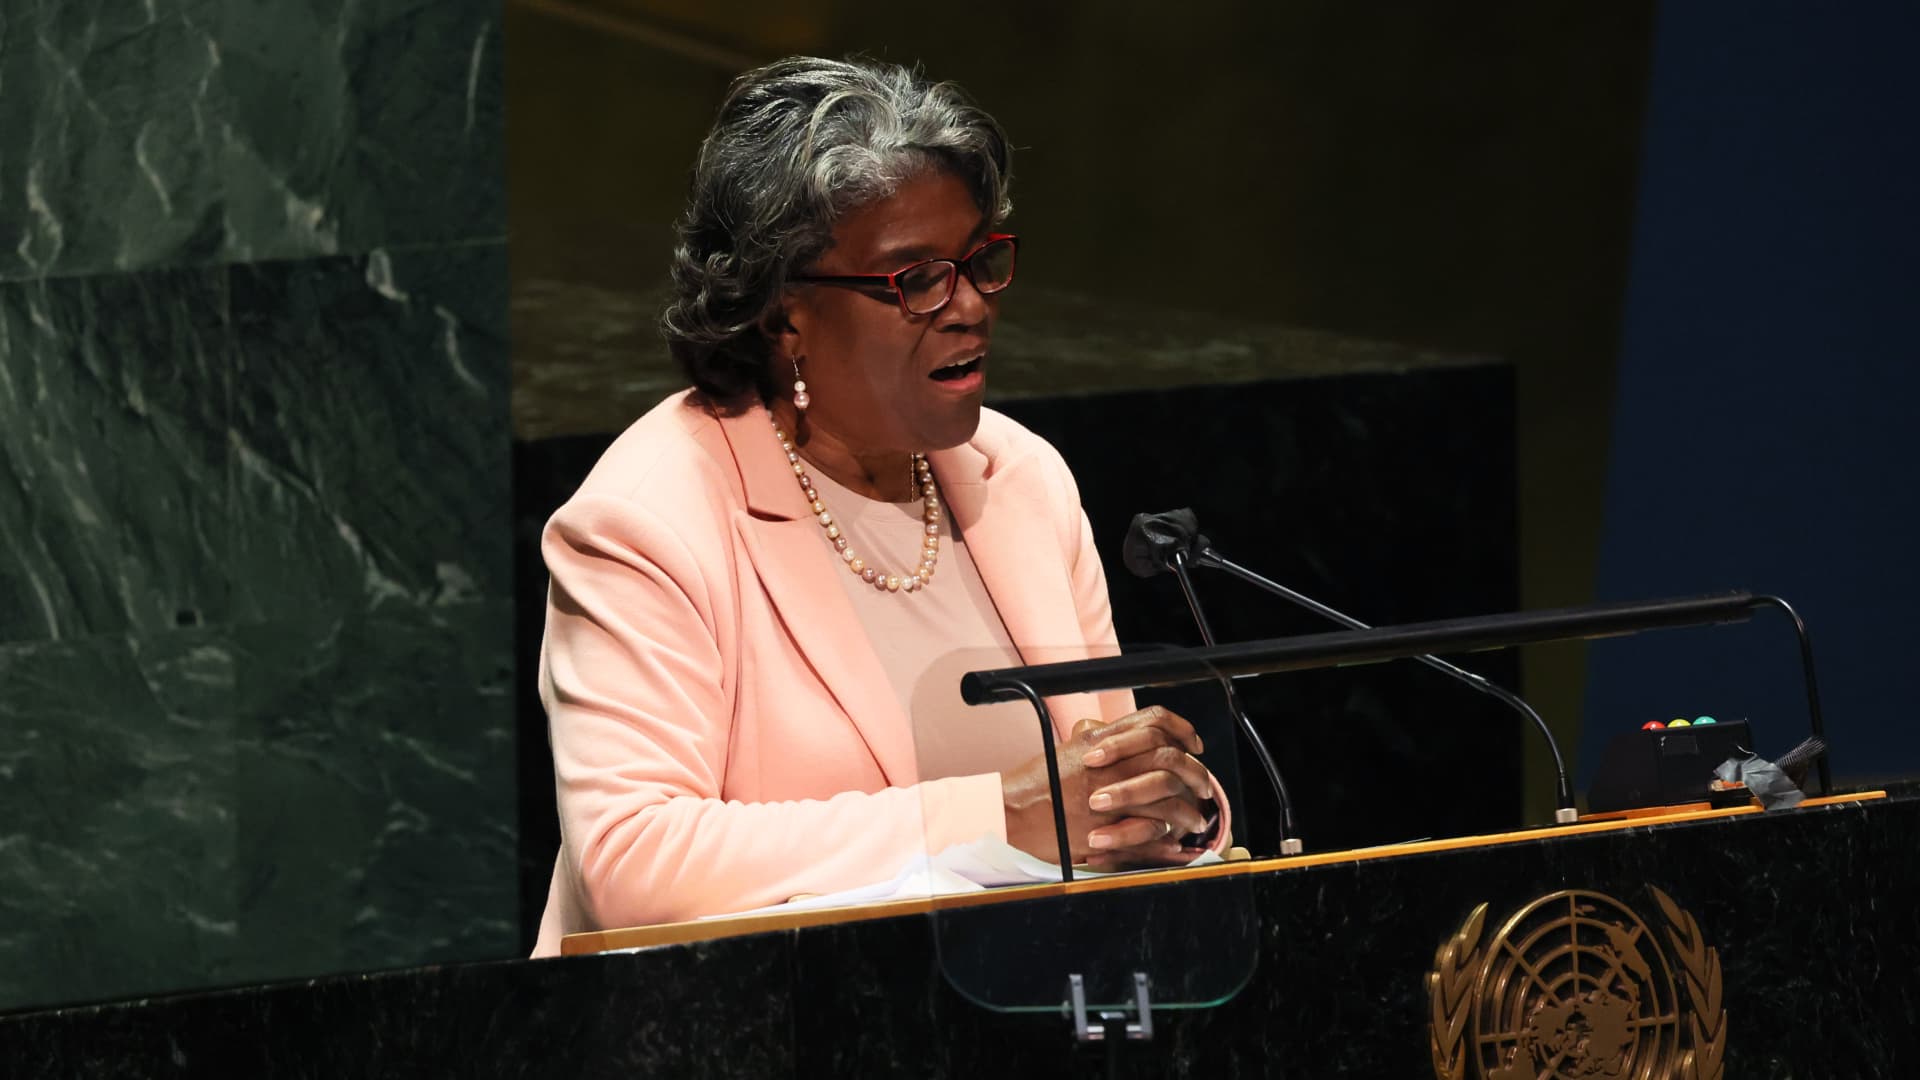 Linda Thomas-Greenfield, United States Ambassador to the United Nations, addresses the United Nations General Assembly during a special session at the United Nations headquarters on March 23, 2022 in New York City.